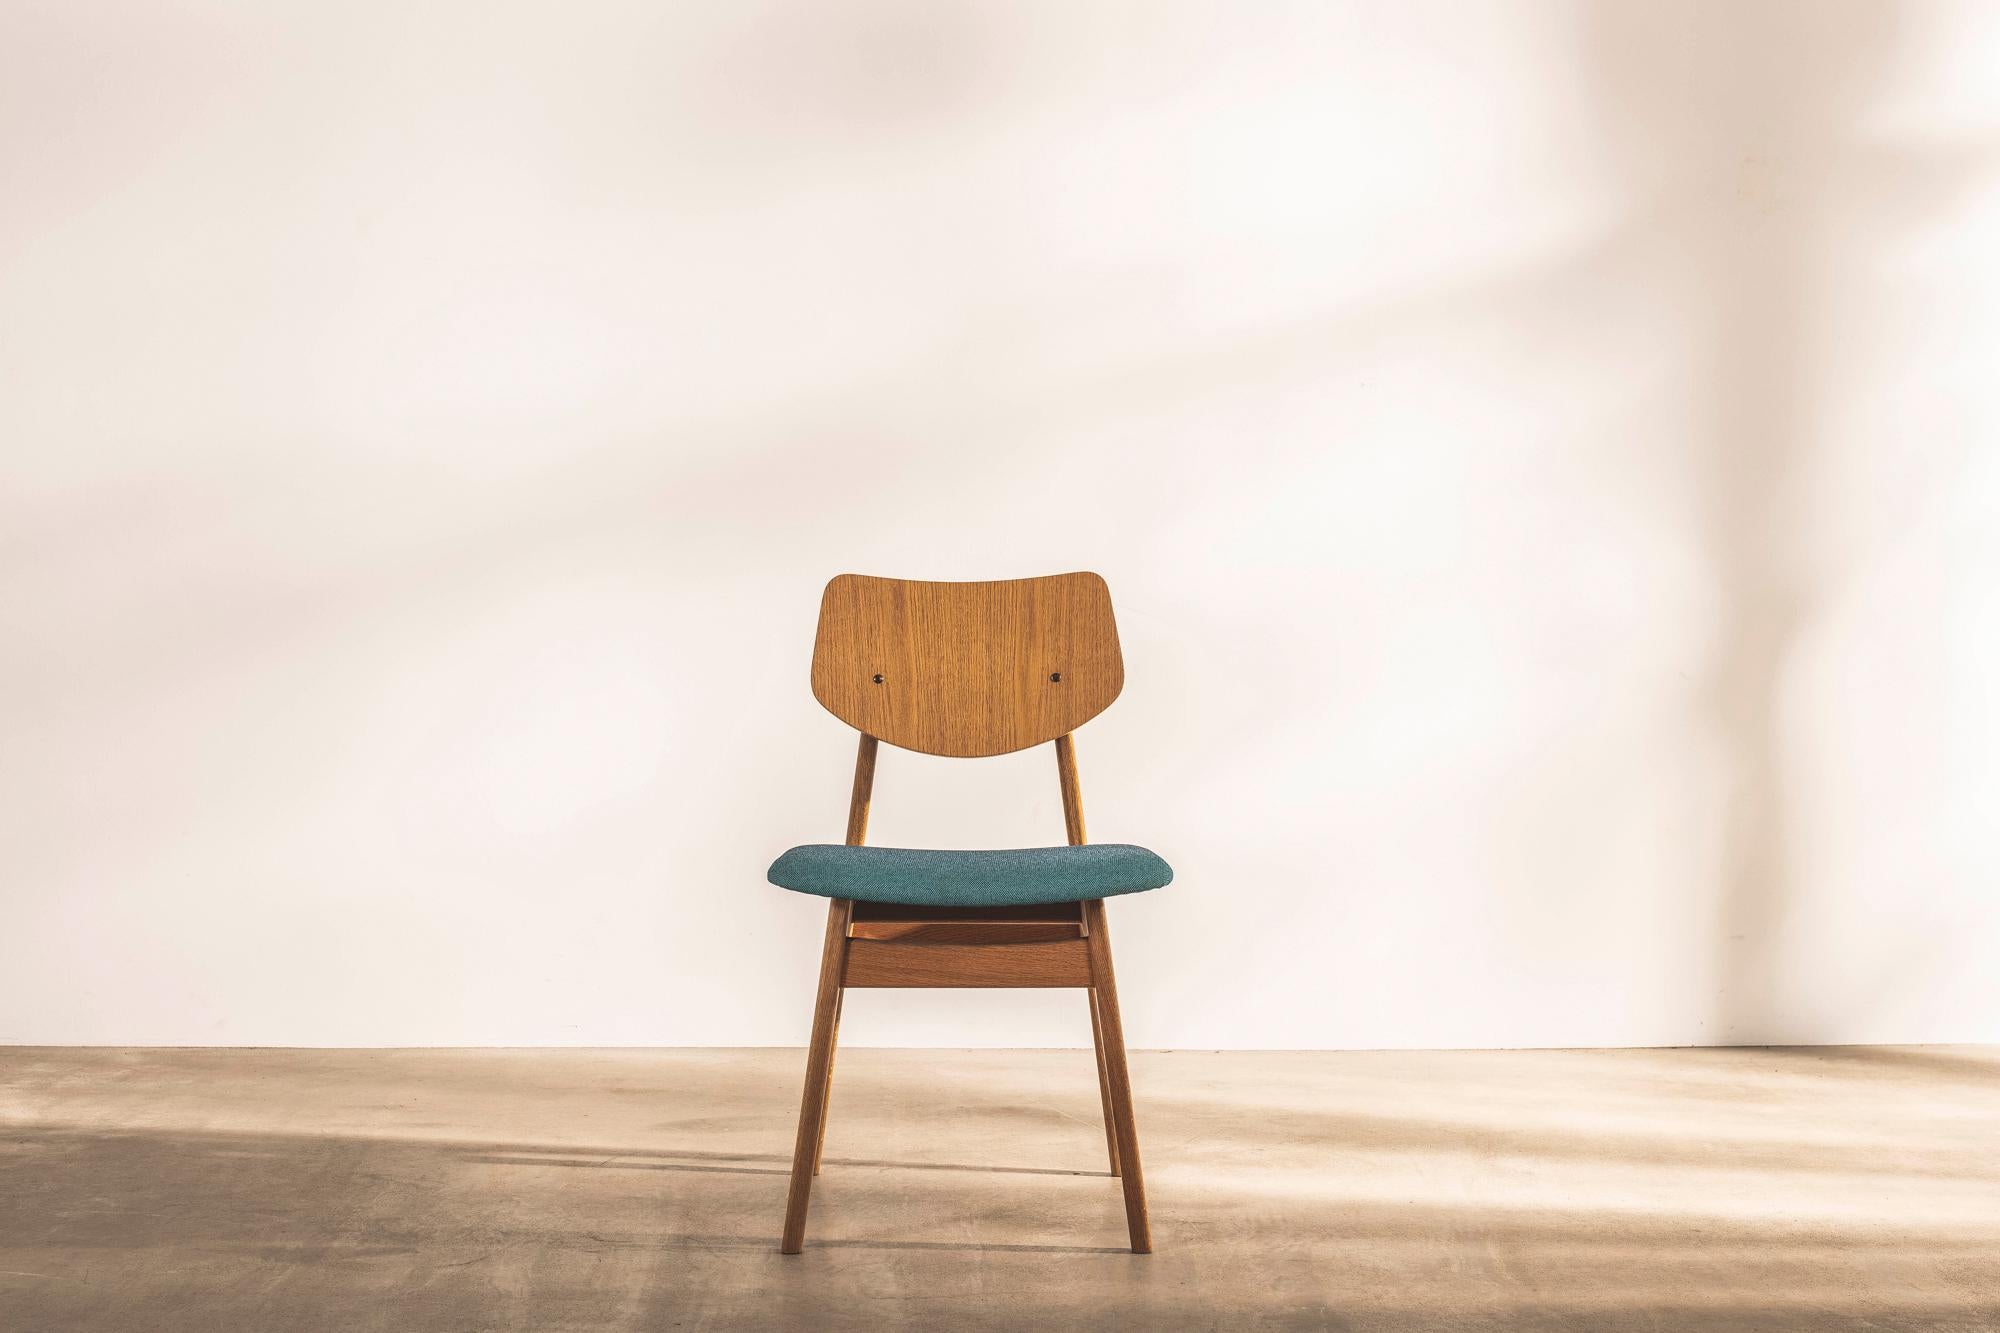 The C275 side chair was designed in 1957 and first appeared in the Jens Risom Design ‘Contemporary Furniture Catalog Supplement’ of that year. 

The piece is offered with an oak frame, a laminated oak back and a choice of upholstery options.

In